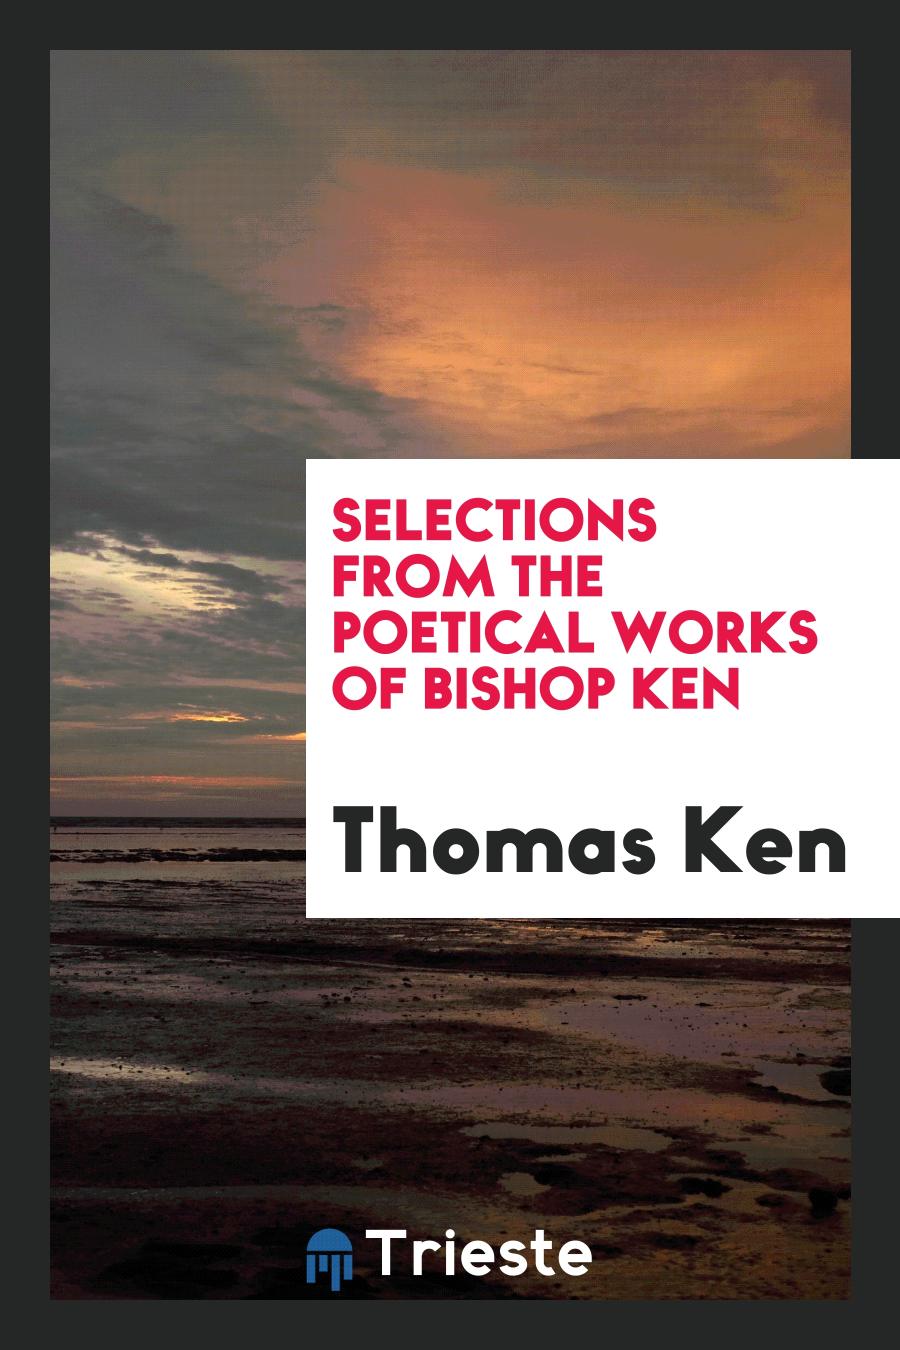 Selections from the Poetical Works of Bishop Ken